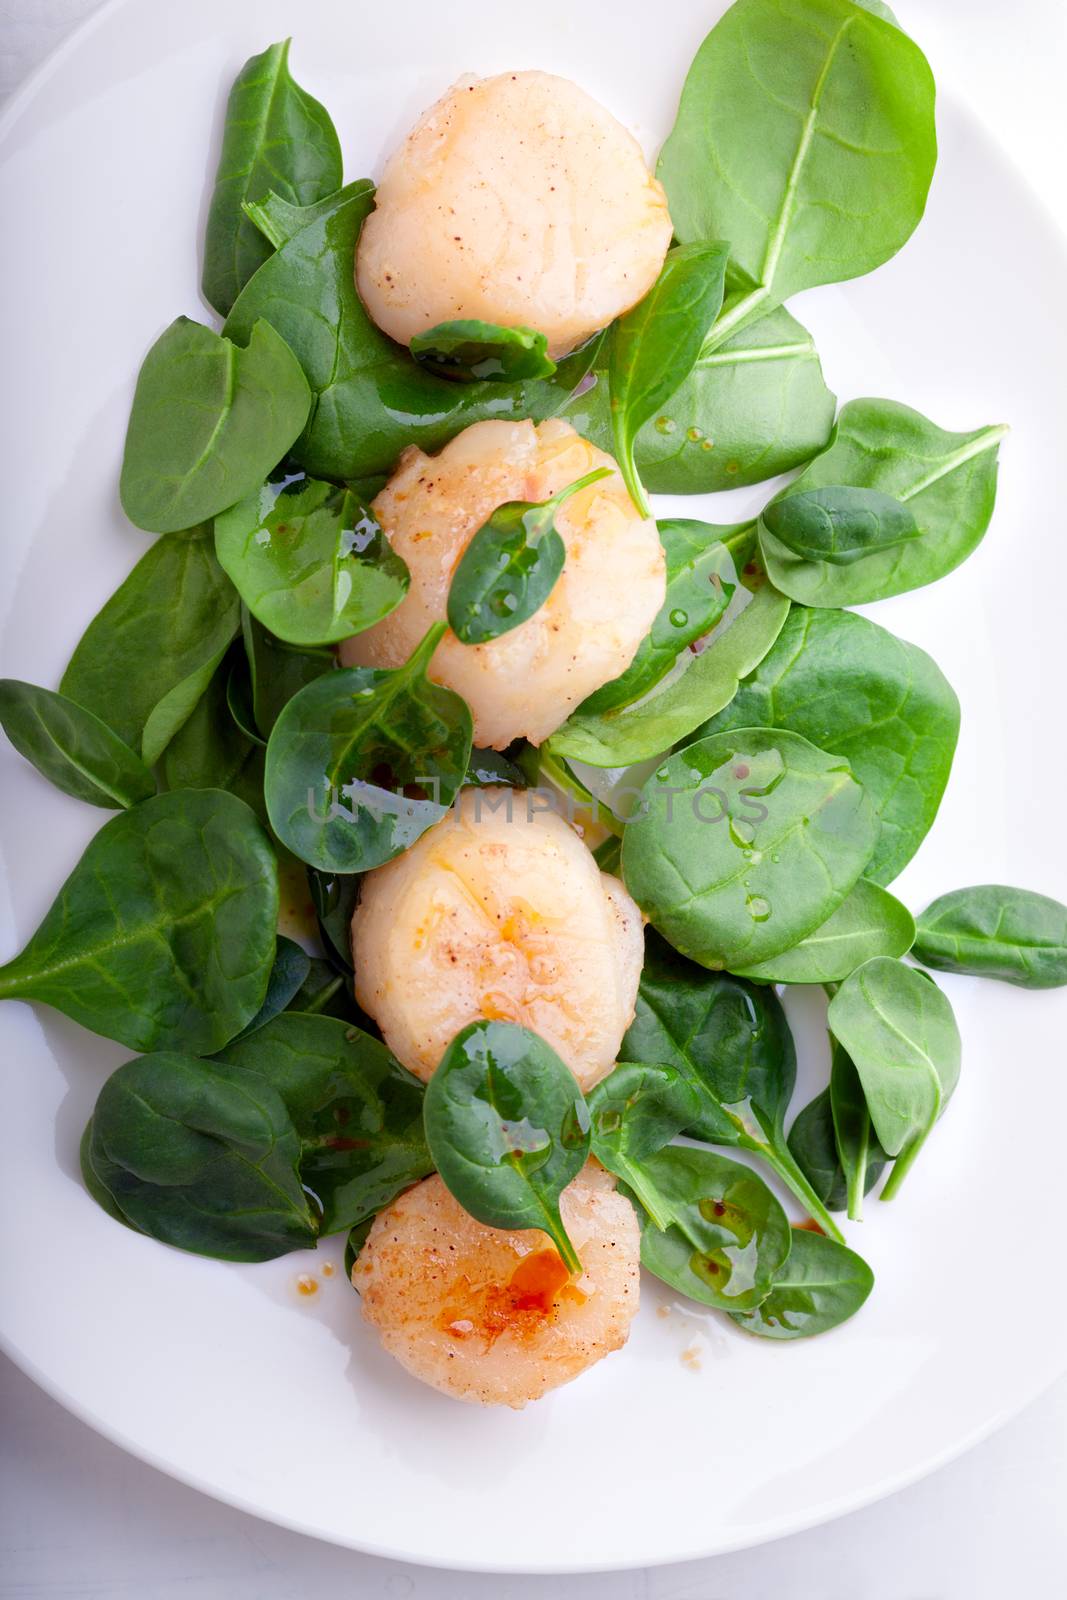 Scallop Salad with greenery by supercat67